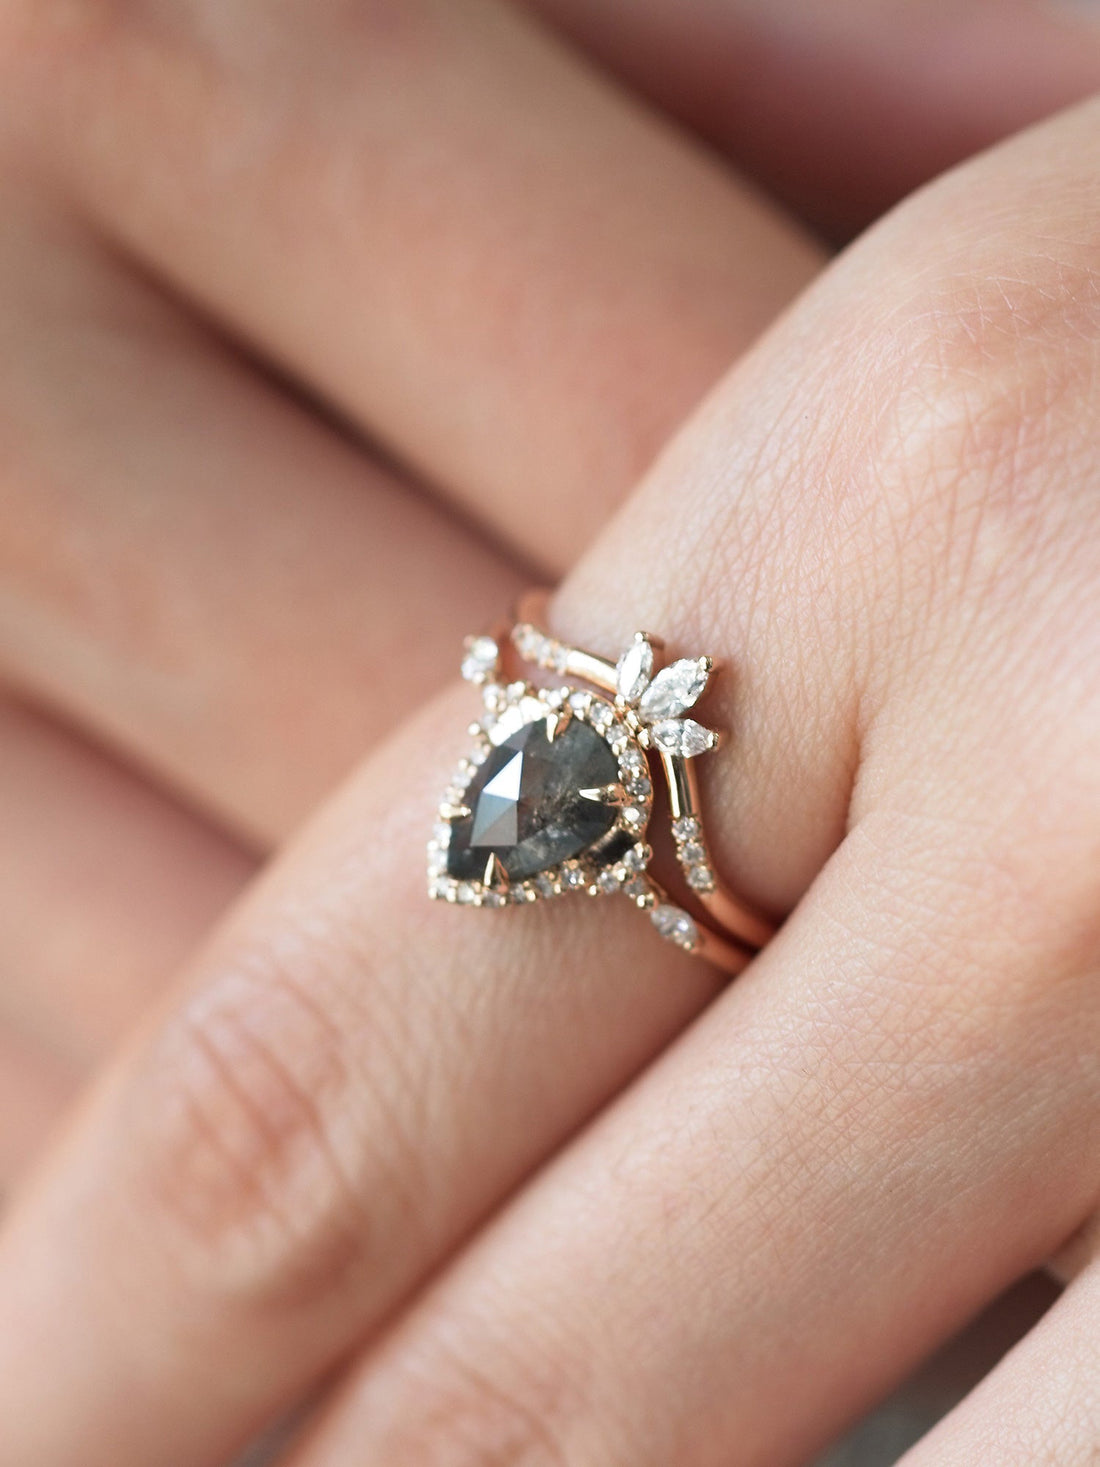 Pear-shaped salt and pepper diamond engagement ring in 14k rose gold  with matching band inspired by the art deco style and minimalism on model&